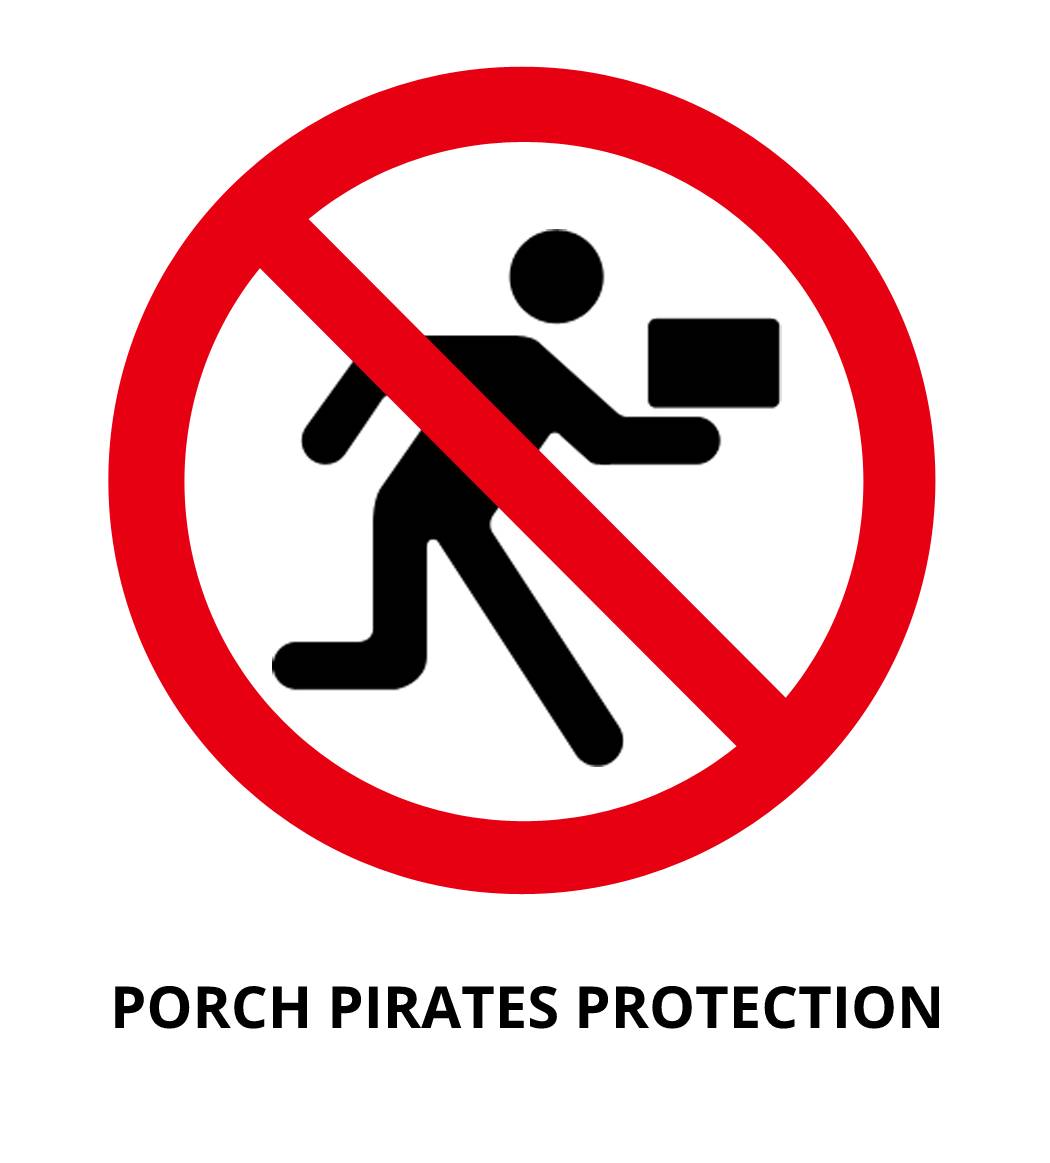 Porch Pirates Protection (fmb)